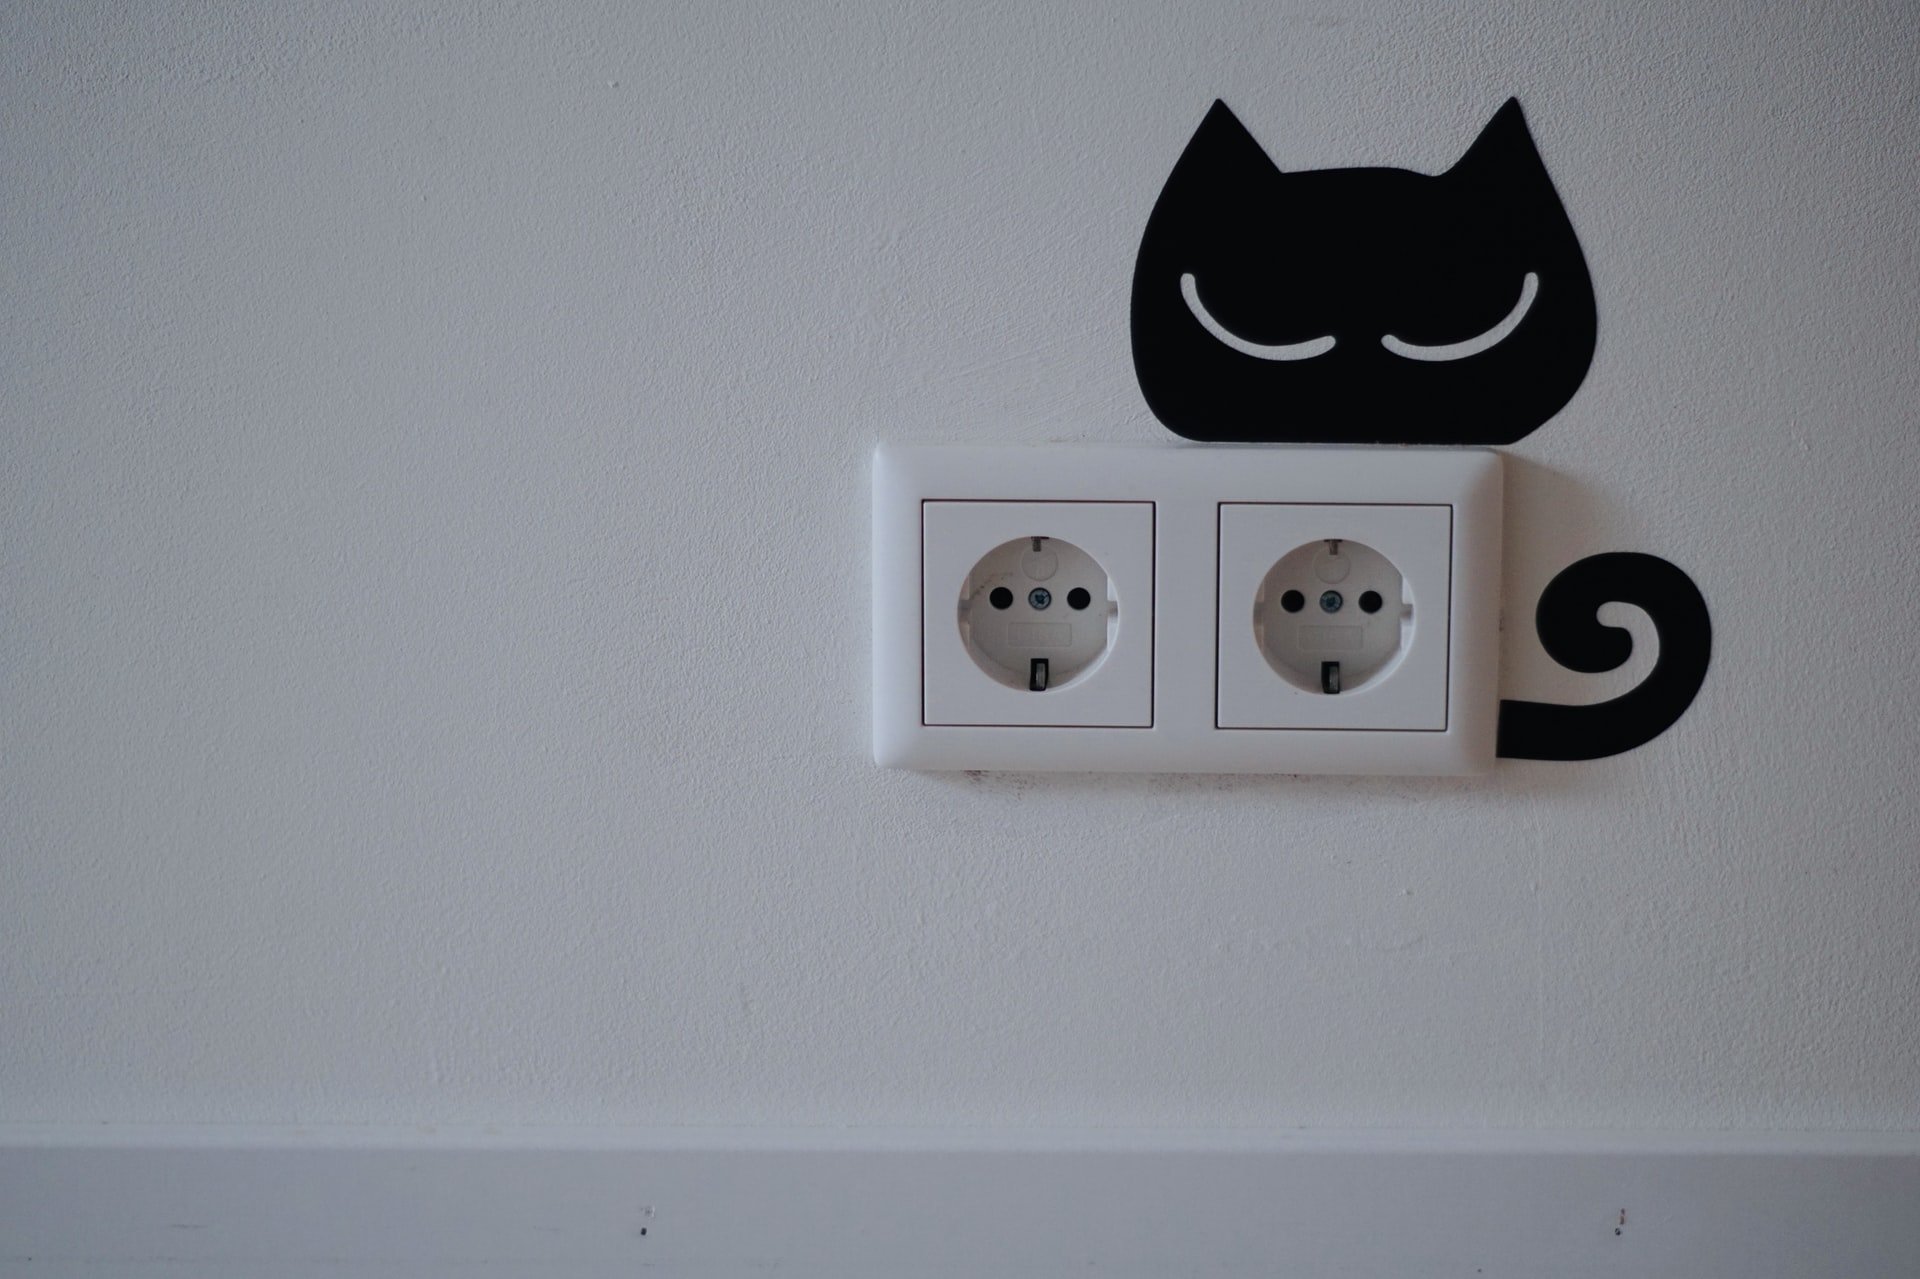 He thought something was weird about the electrical outlet. | Source: Unsplash